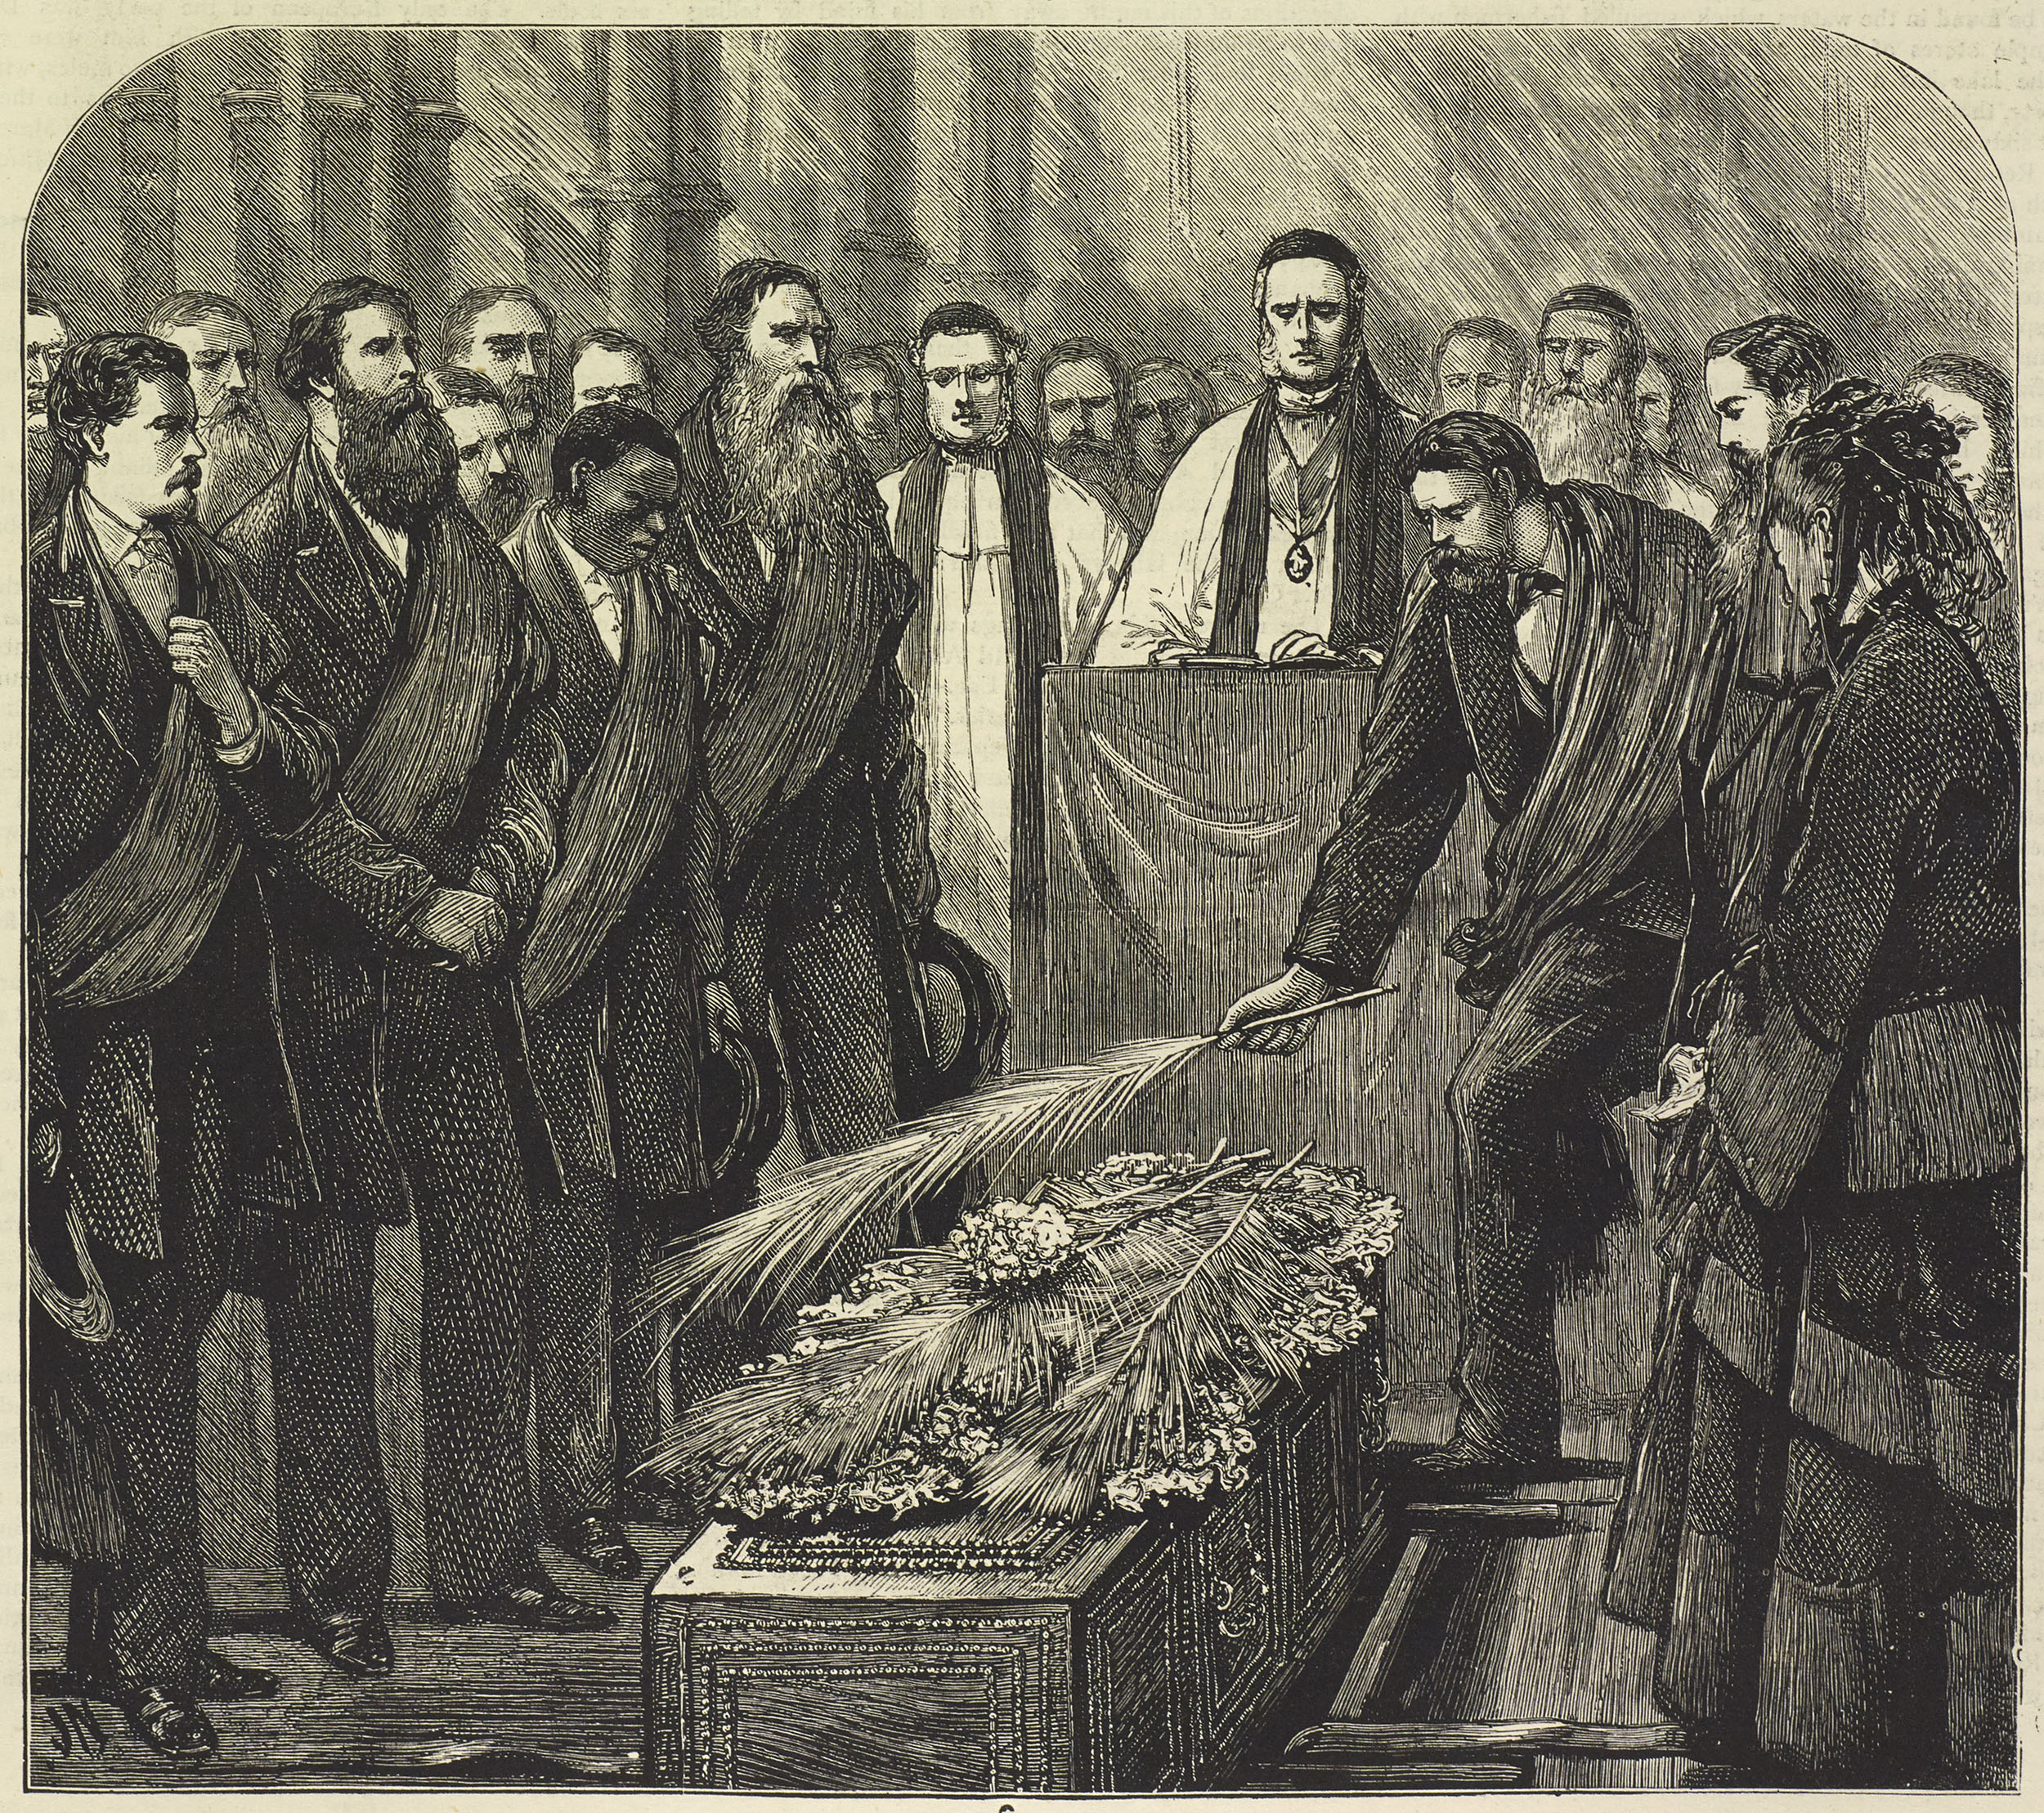 Scene at the Grave, Westminster Abbey. Illustration from Review of David Livingstone's Last Journals (Anon. 1874:405). Copyright National Library of Scotland. Creative Commons Share-alike 2.5 UK: Scotland (https://creativecommons.org/licenses/by-nc-sa/2.5/scotland/).